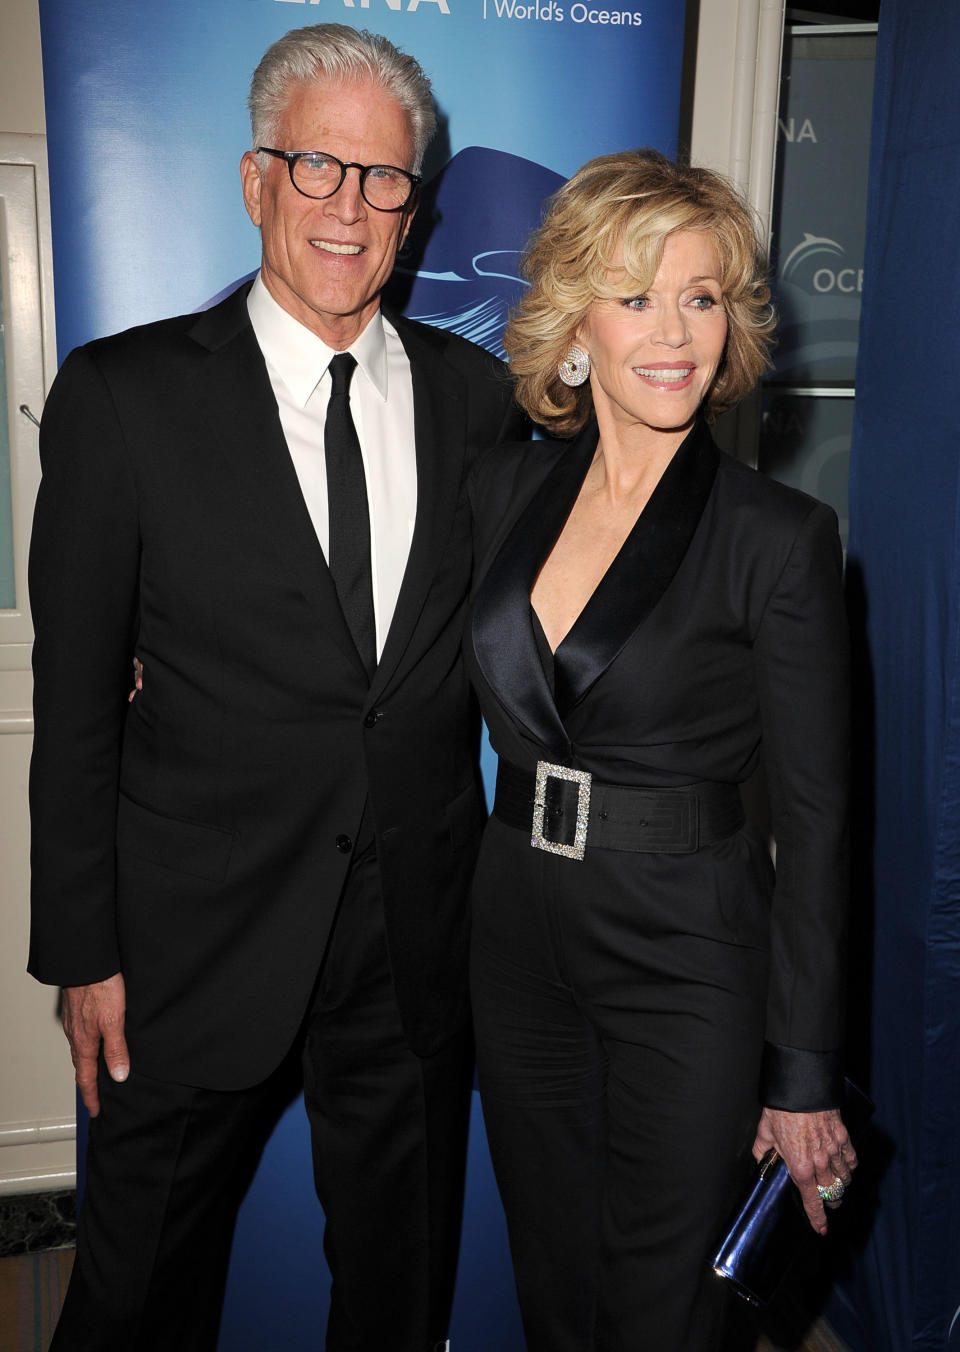 BEVERLY HILLS, CA - OCTOBER 30:  Ted Danson and Jane Fonda arrives at the Oceana Partners Award Gala With Former Secretary Of State Hillary Rodham Clinton and HBO CEO Richard Pleple at Regent Beverly Wilshire Hotel on October 30, 2013 in Beverly Hills, California.  (Photo by Steve Granitz/WireImage)